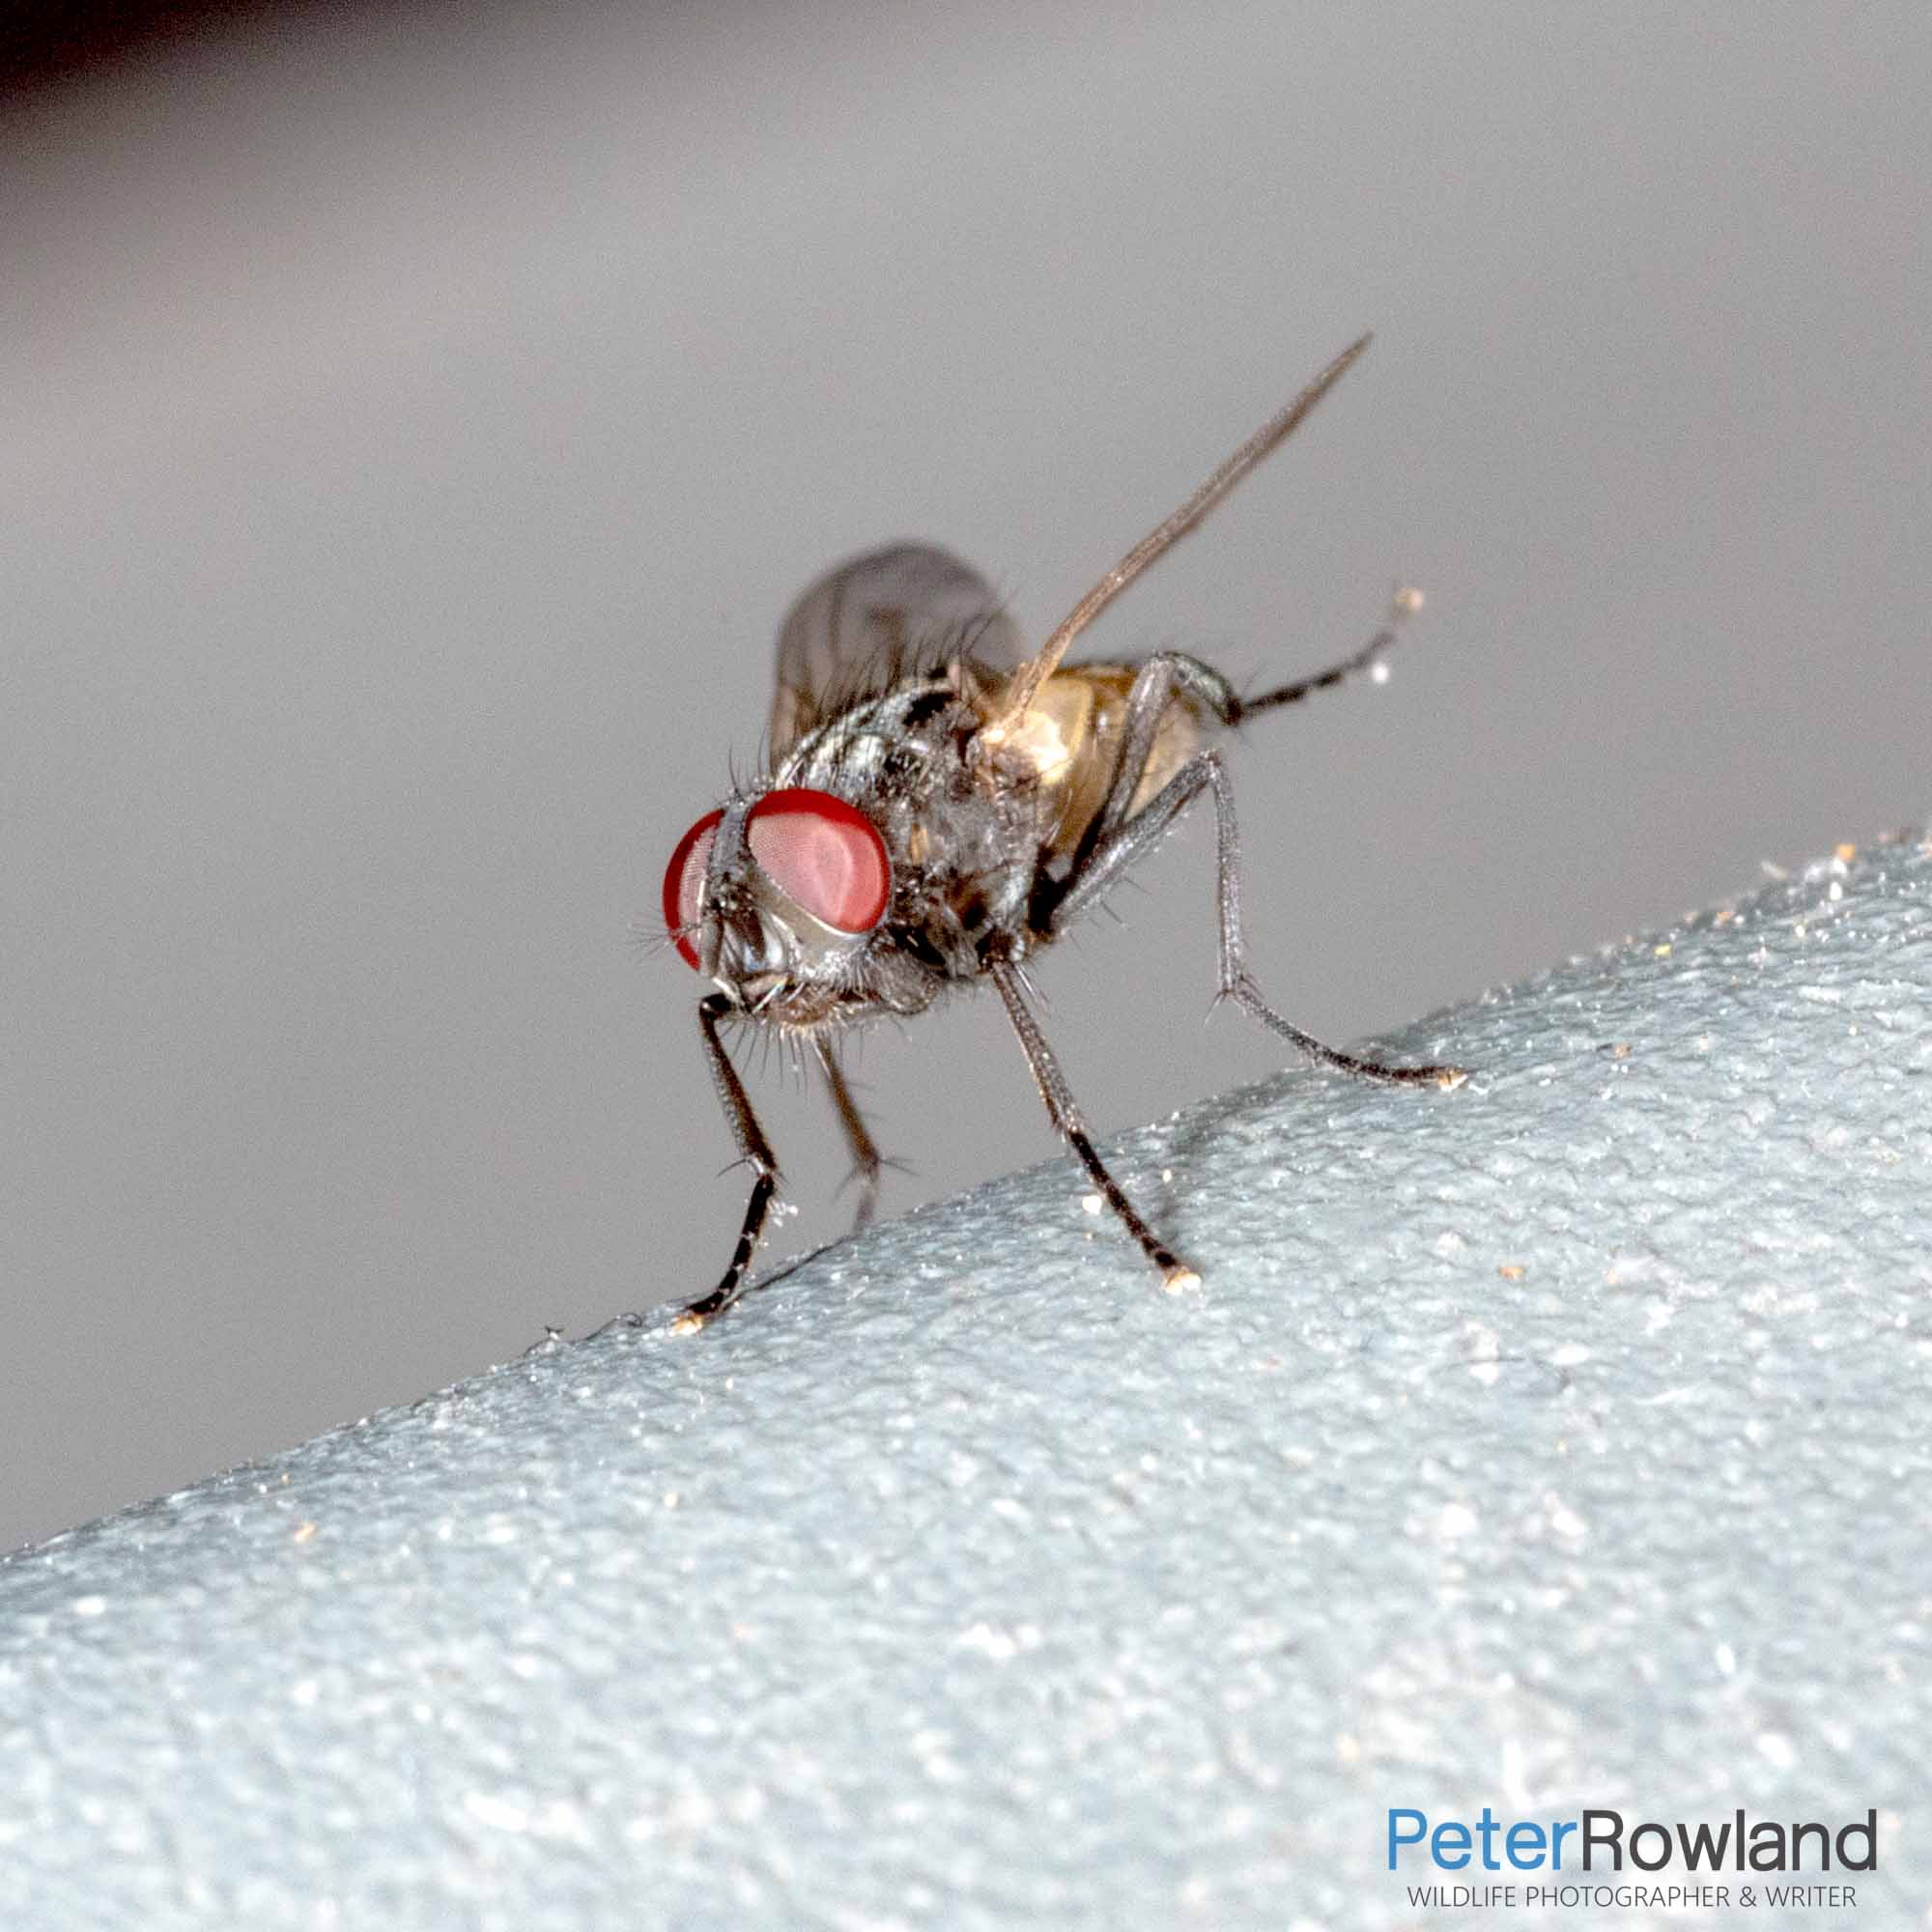 A House Fly grooming its legs